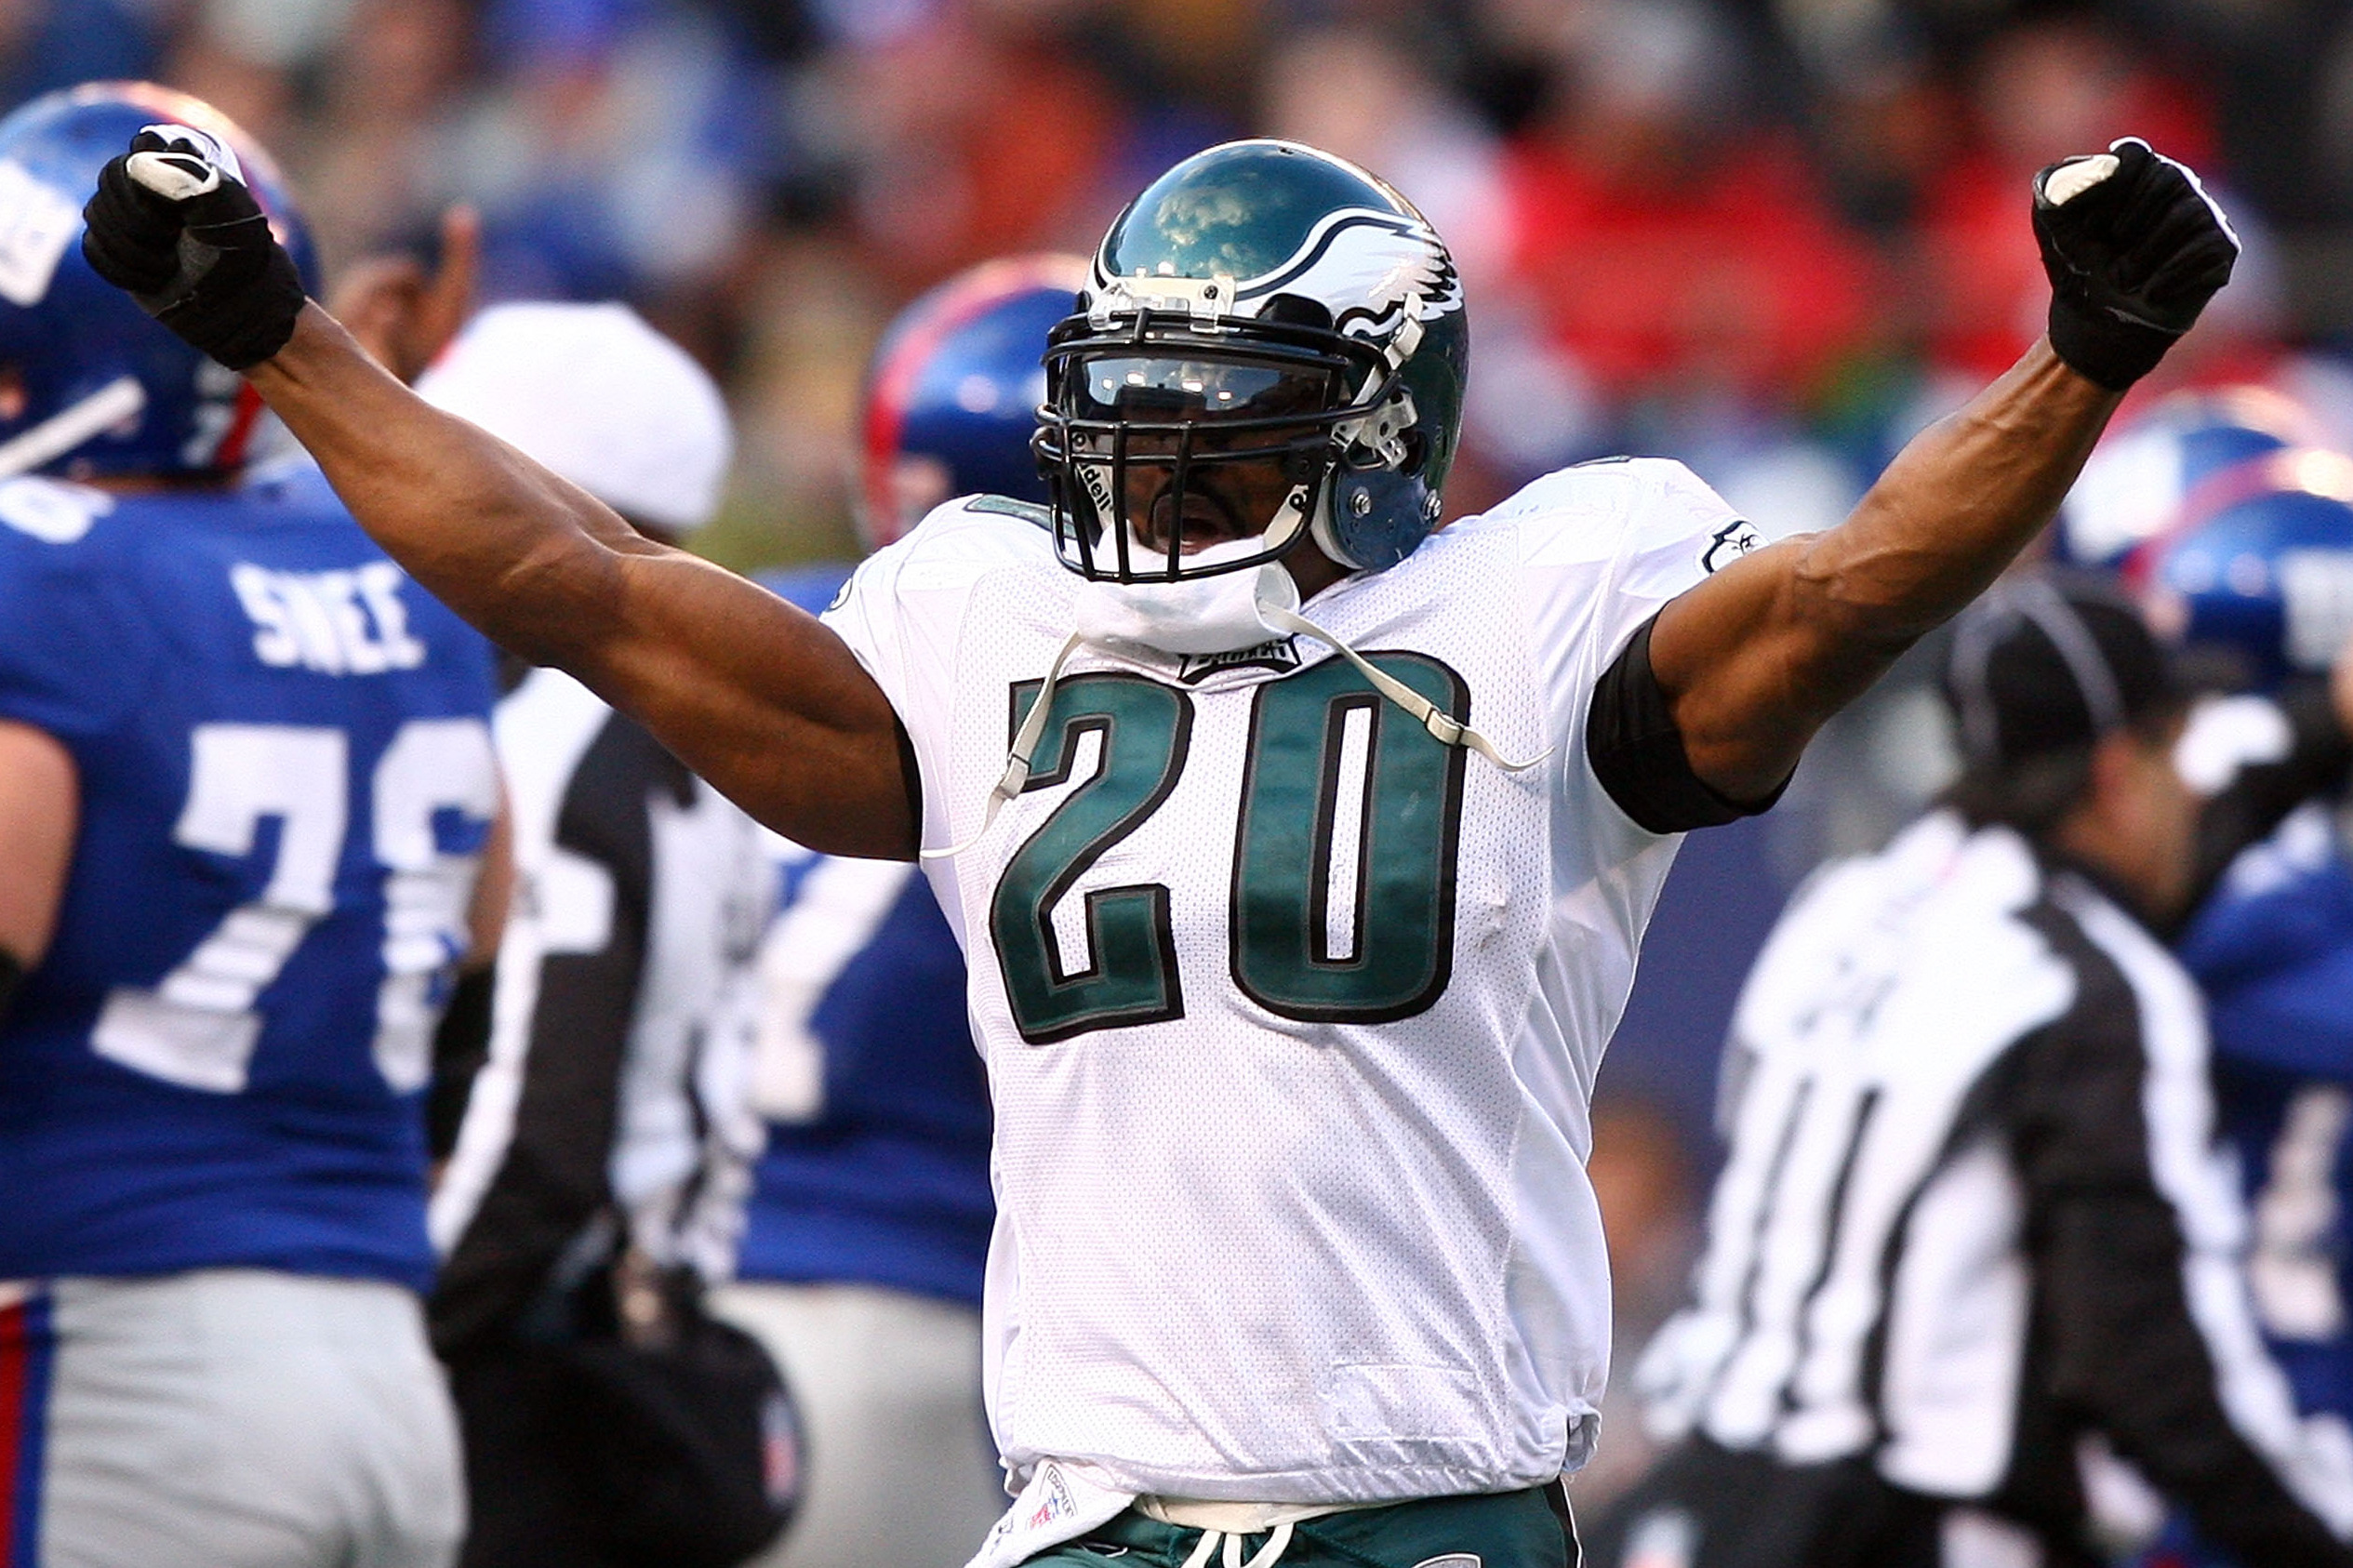 Brian Dawkins, former Eagles, Broncos safety, announces retirement from NFL  